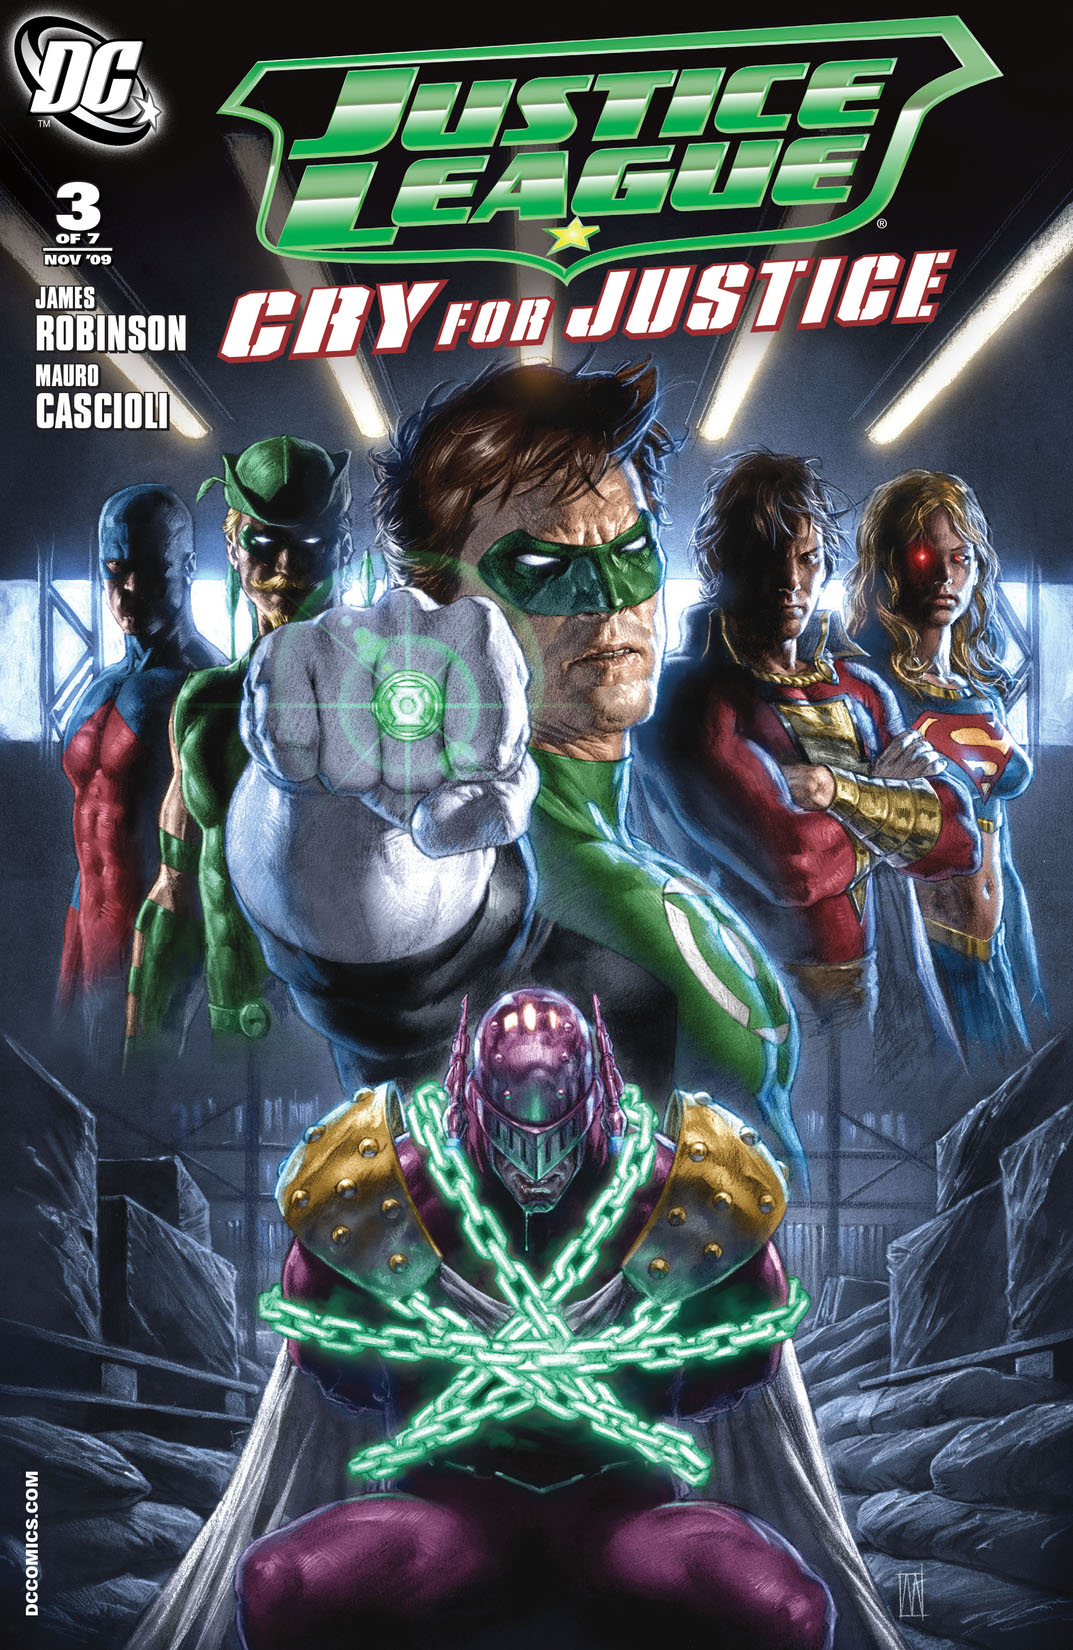 Justice League: Cry for Justice #3 preview images